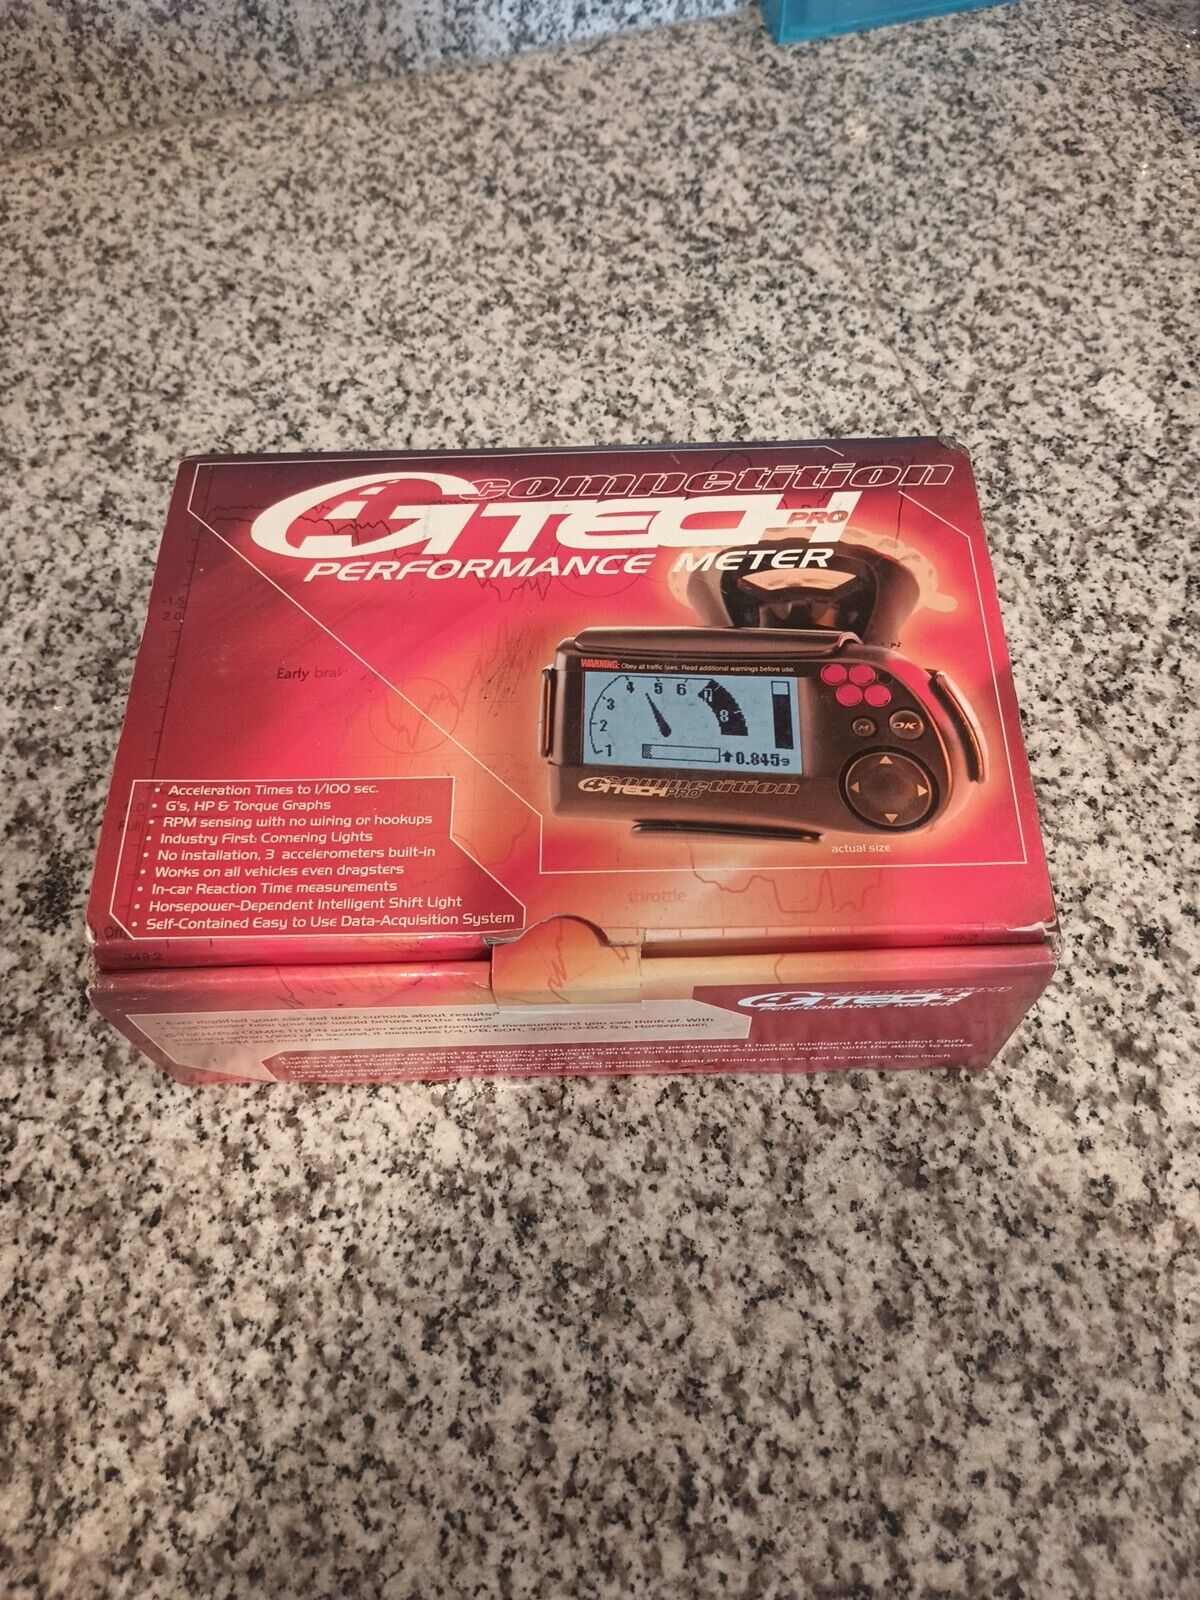 G-Tech Pro Competition Performance Meter G-Dyno Meter